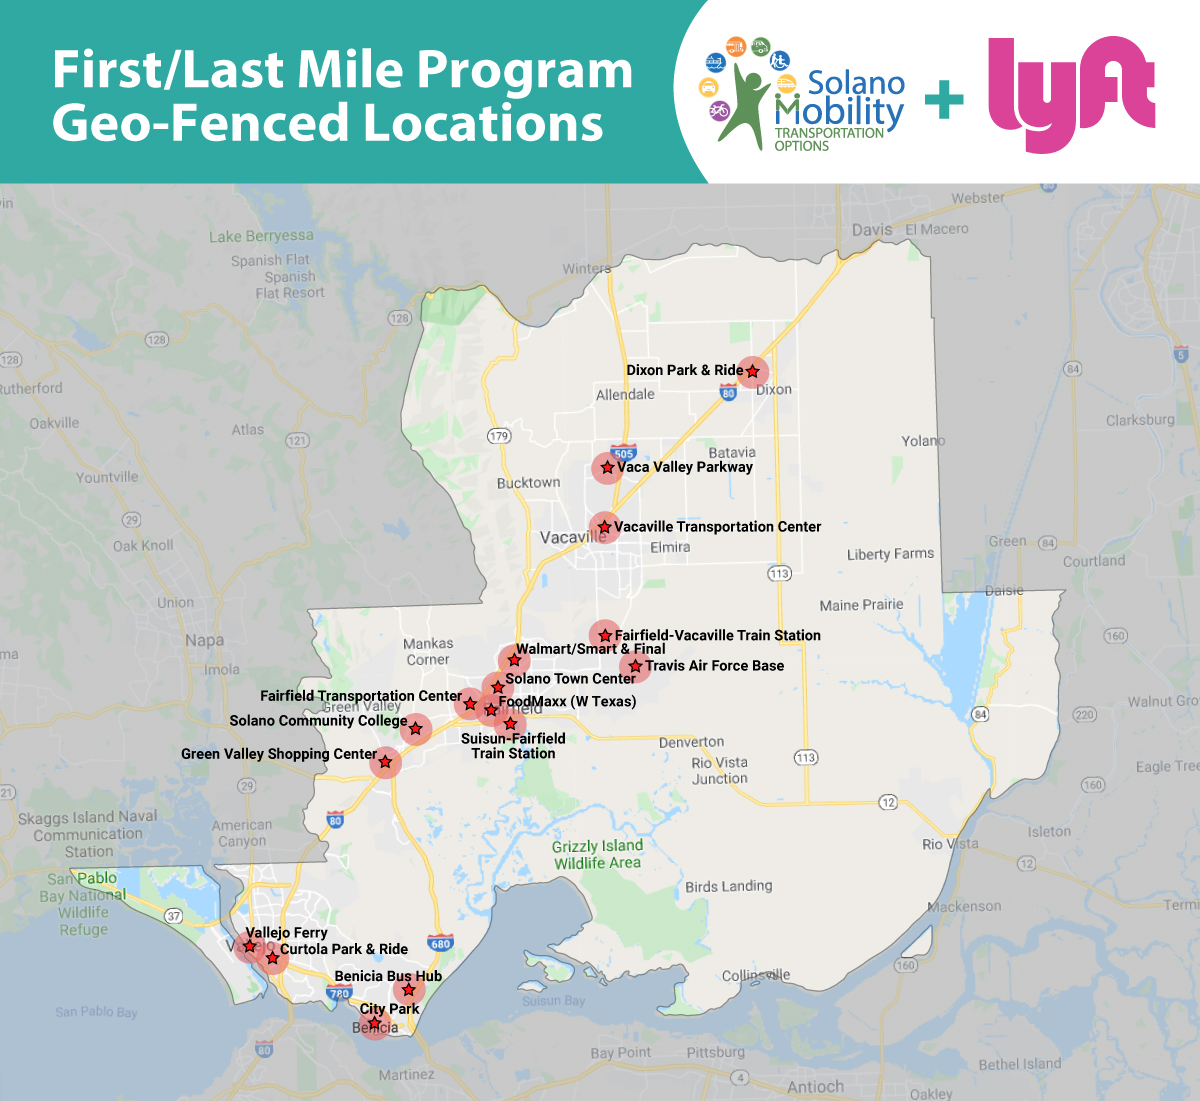 Solano Mobility First / Last Mile Program